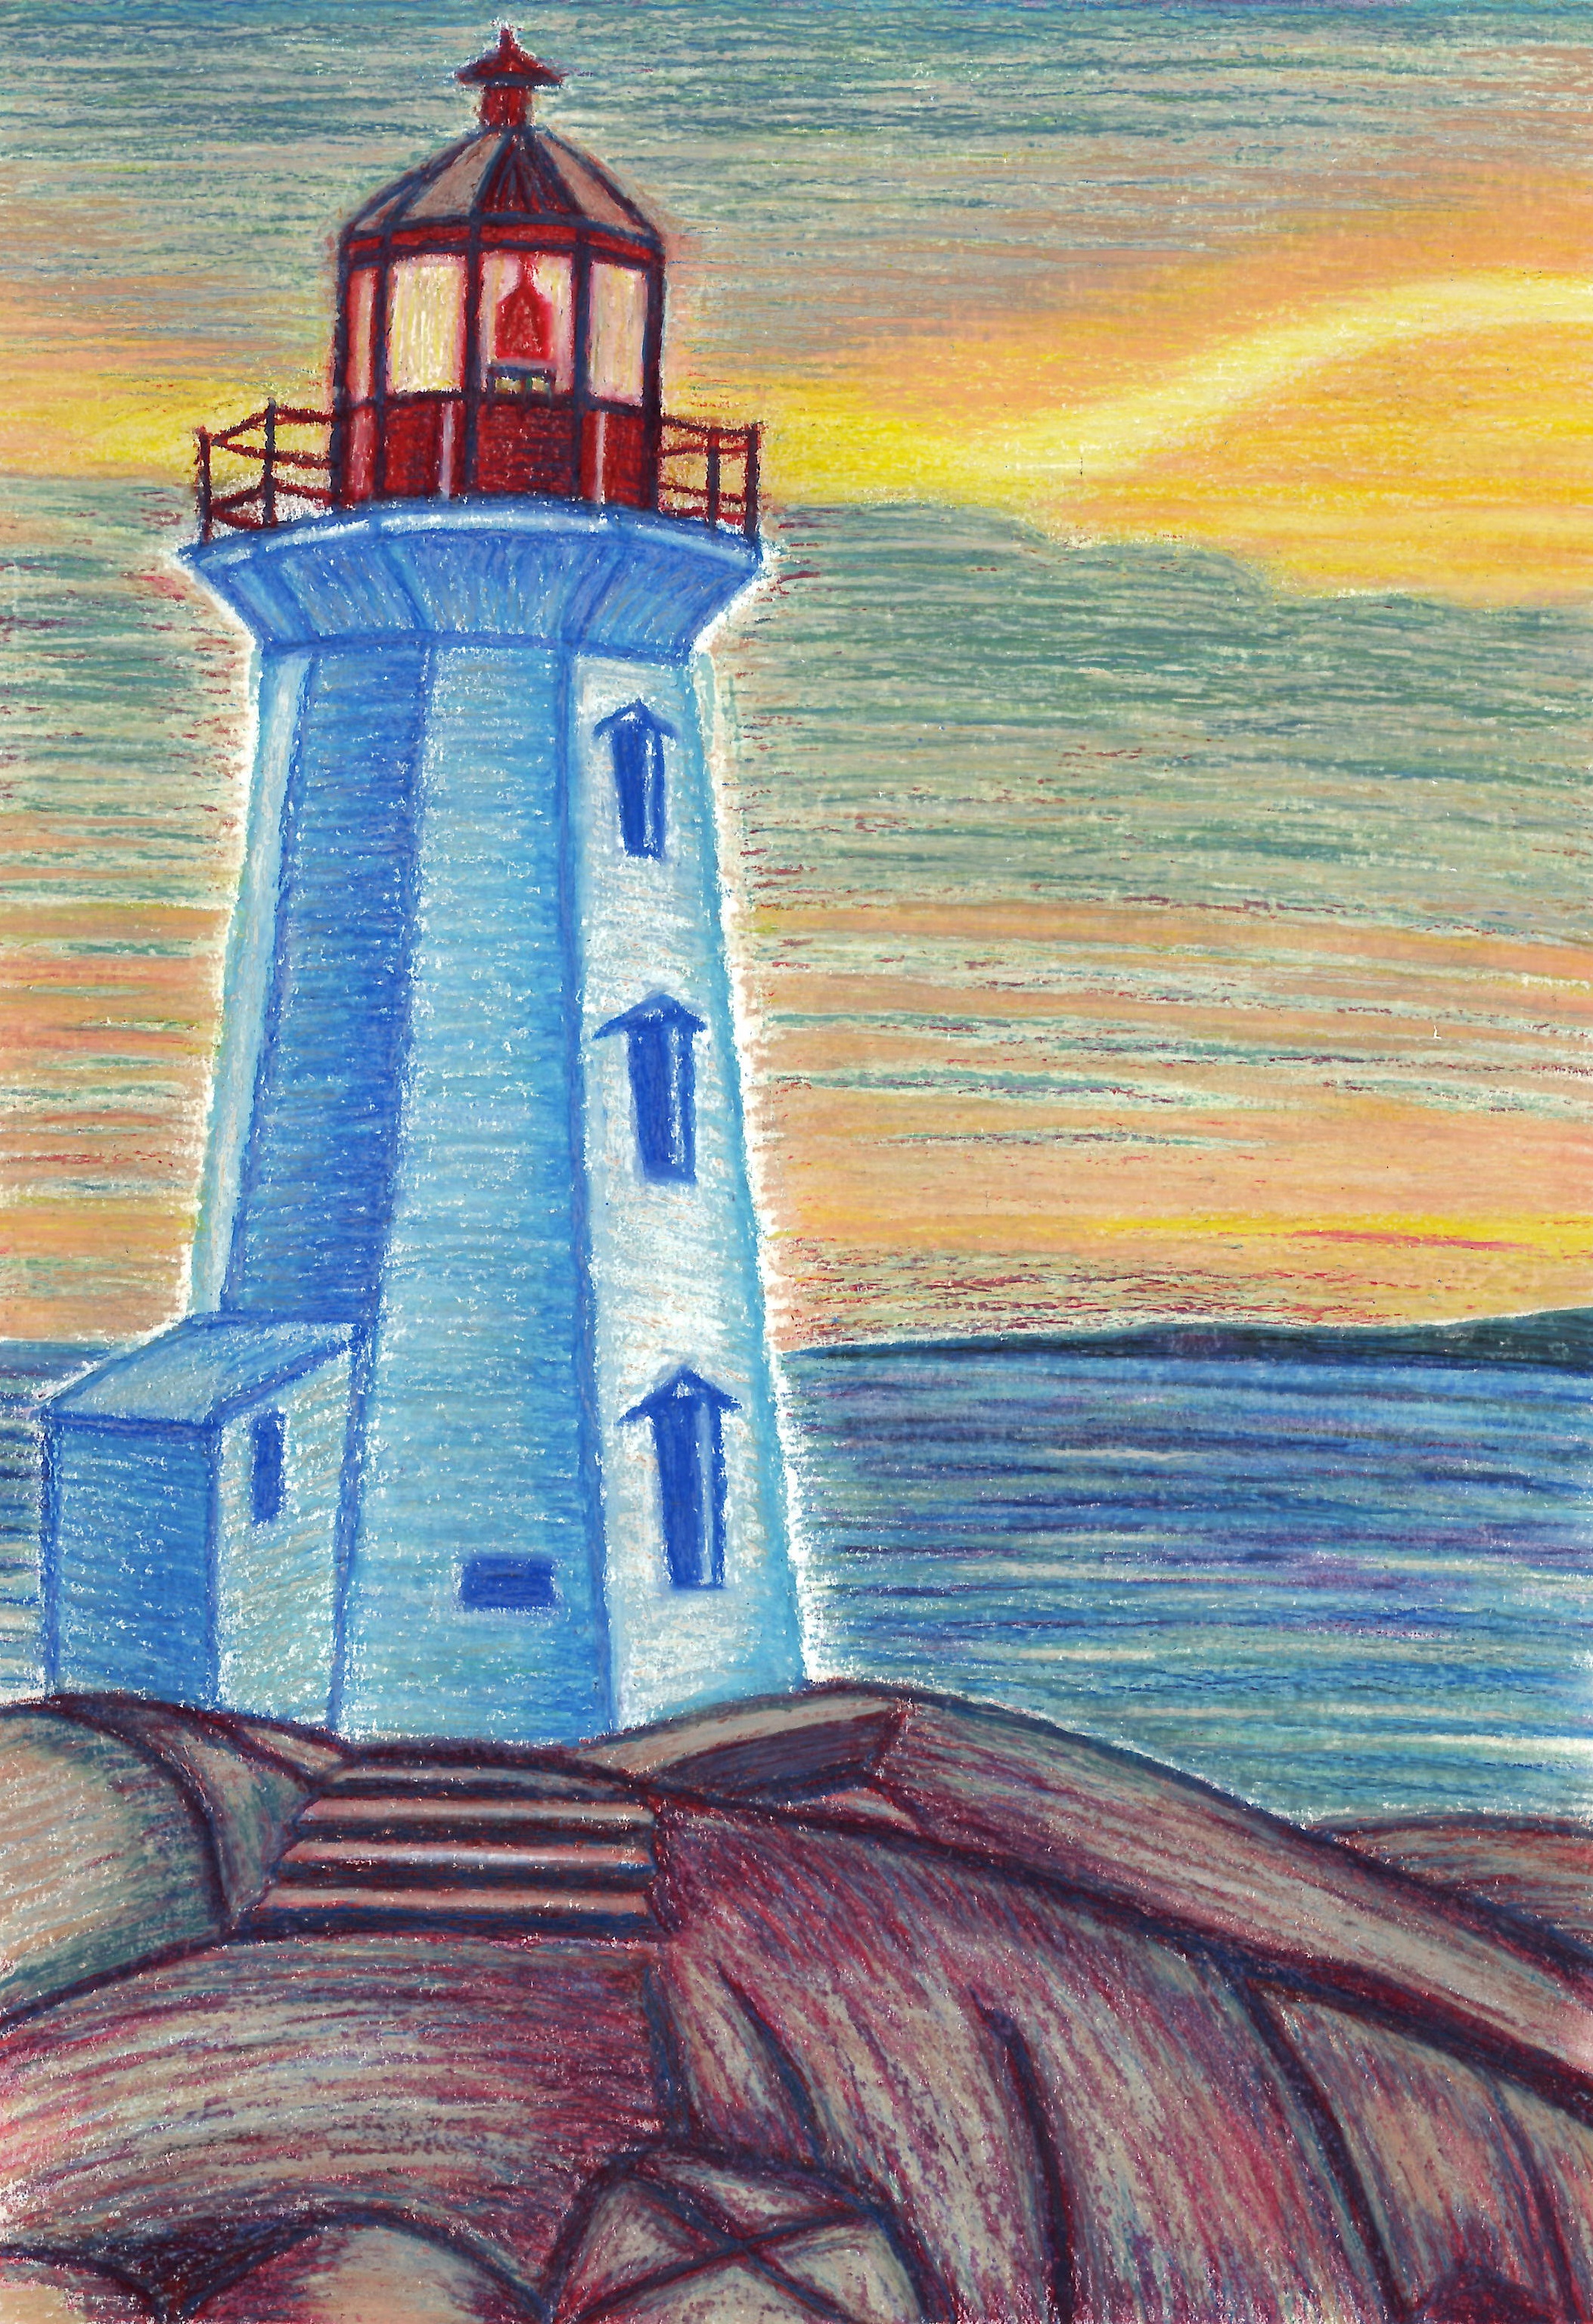 A drawing of a lighthouse at sunset